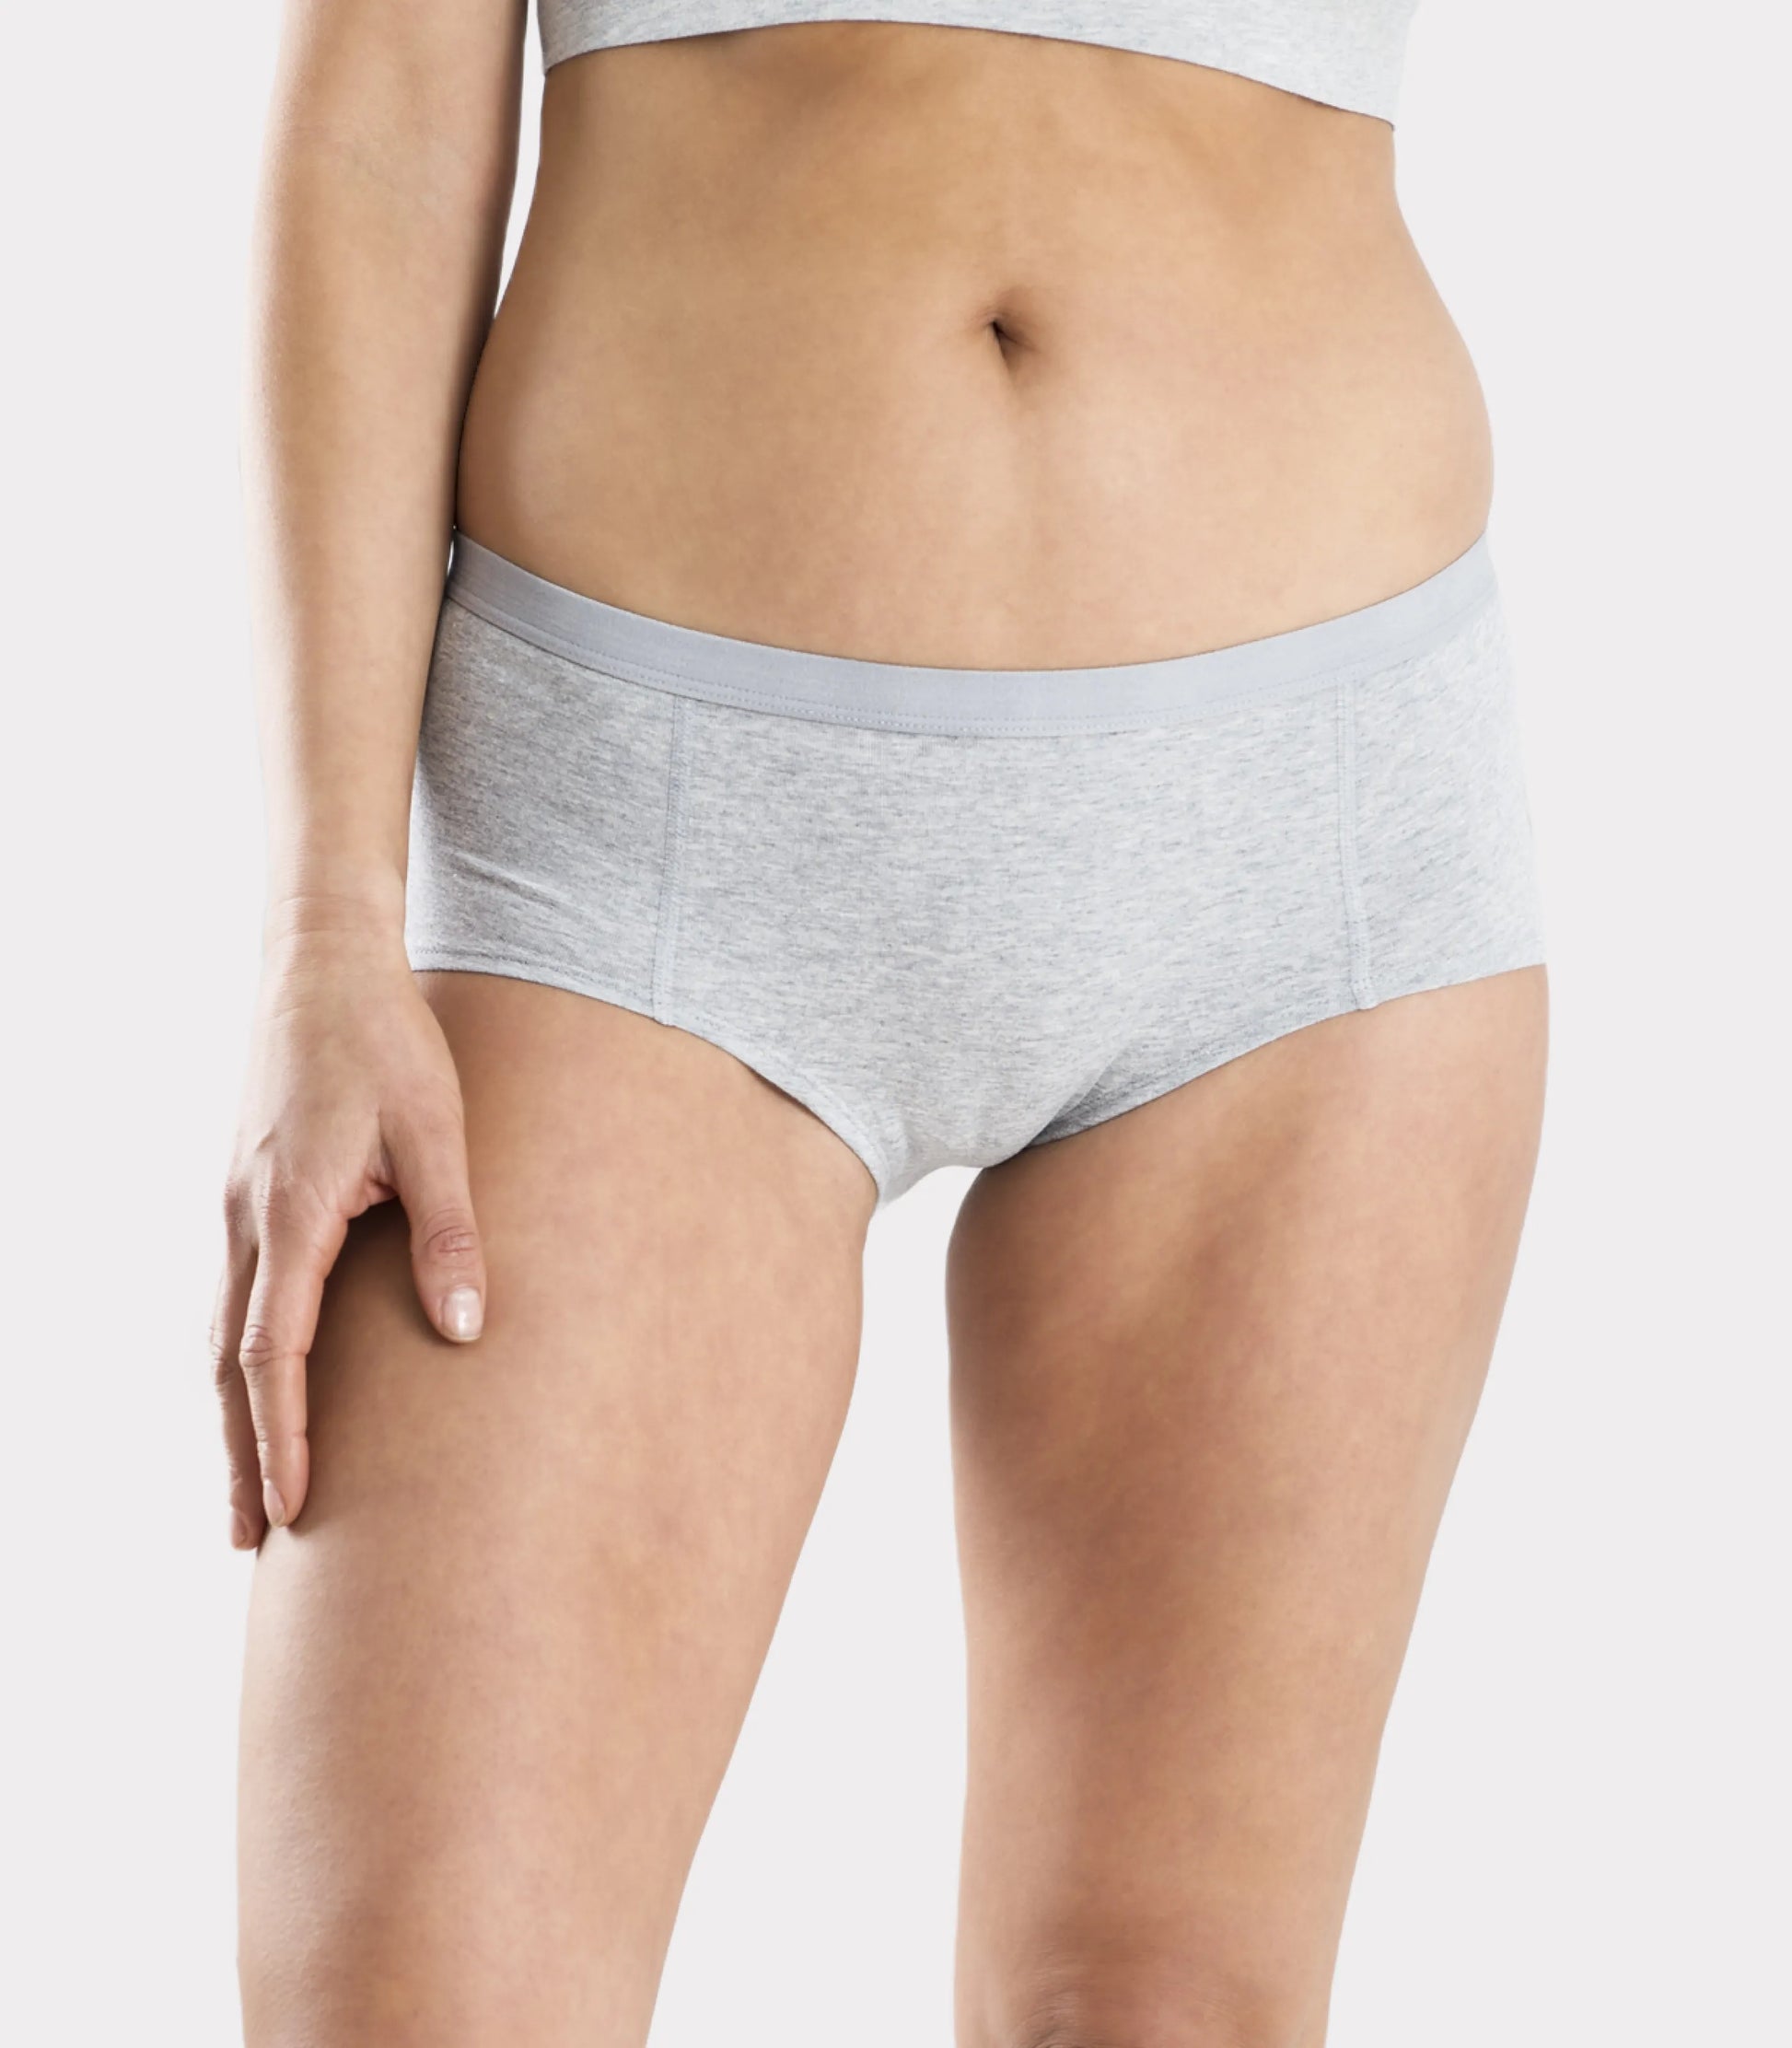 Women's Everyday Boy Short 6-pack made with Organic Cotton